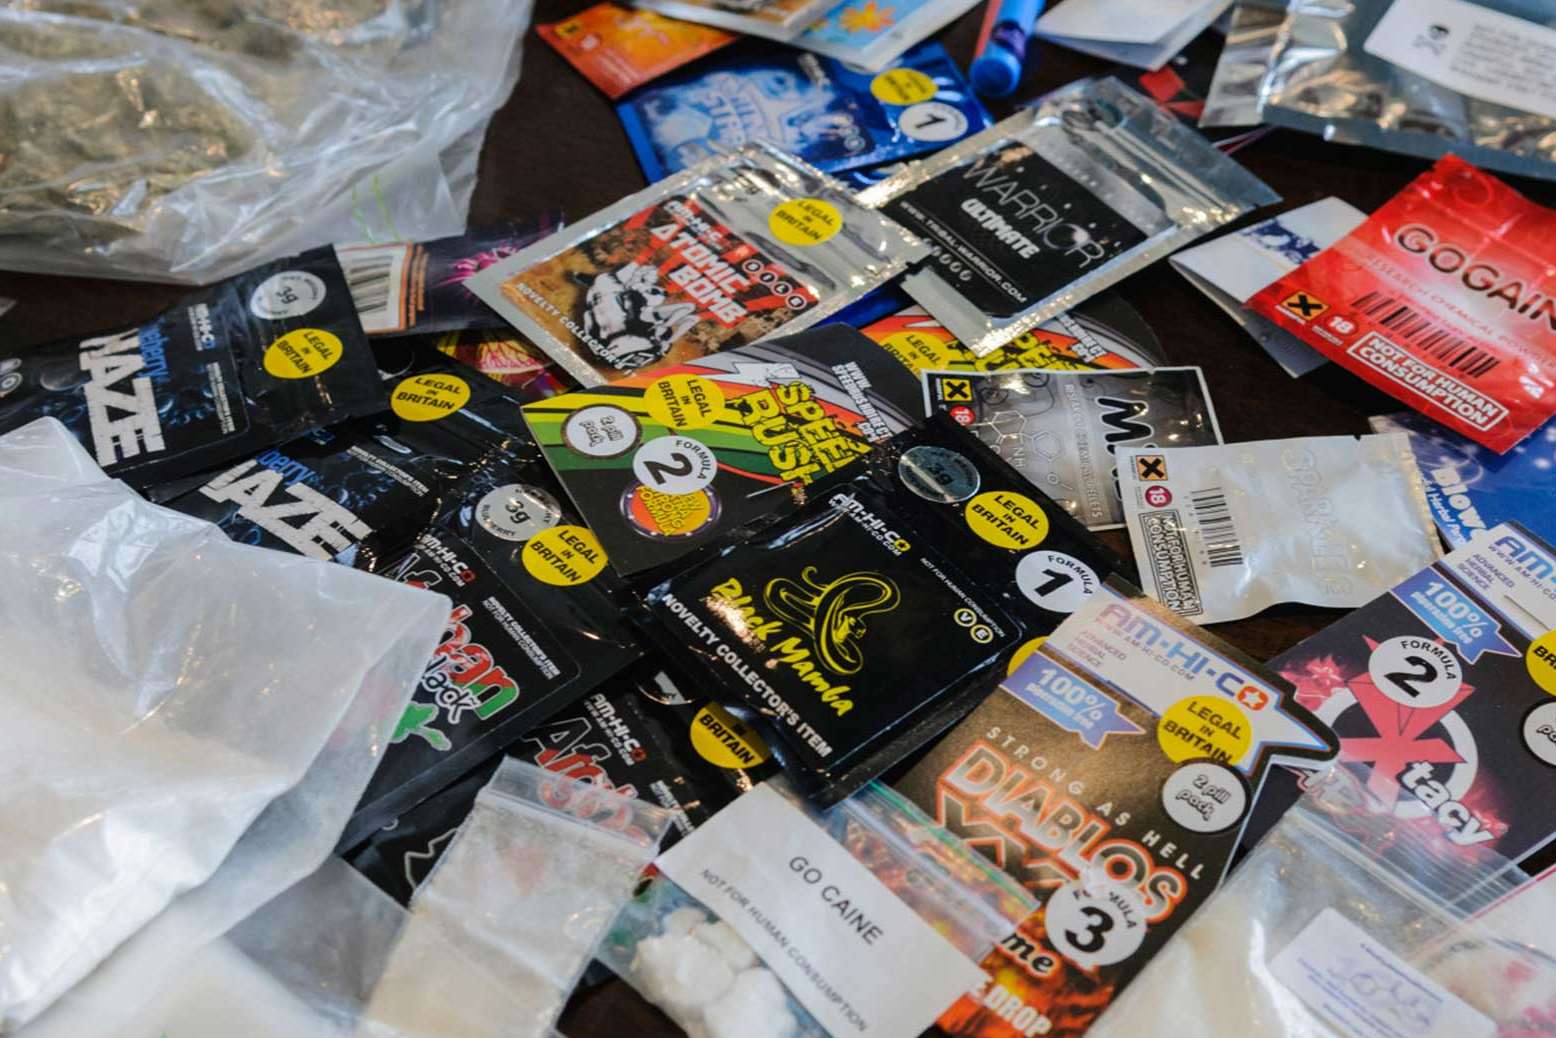 Legal highs are a growing problem